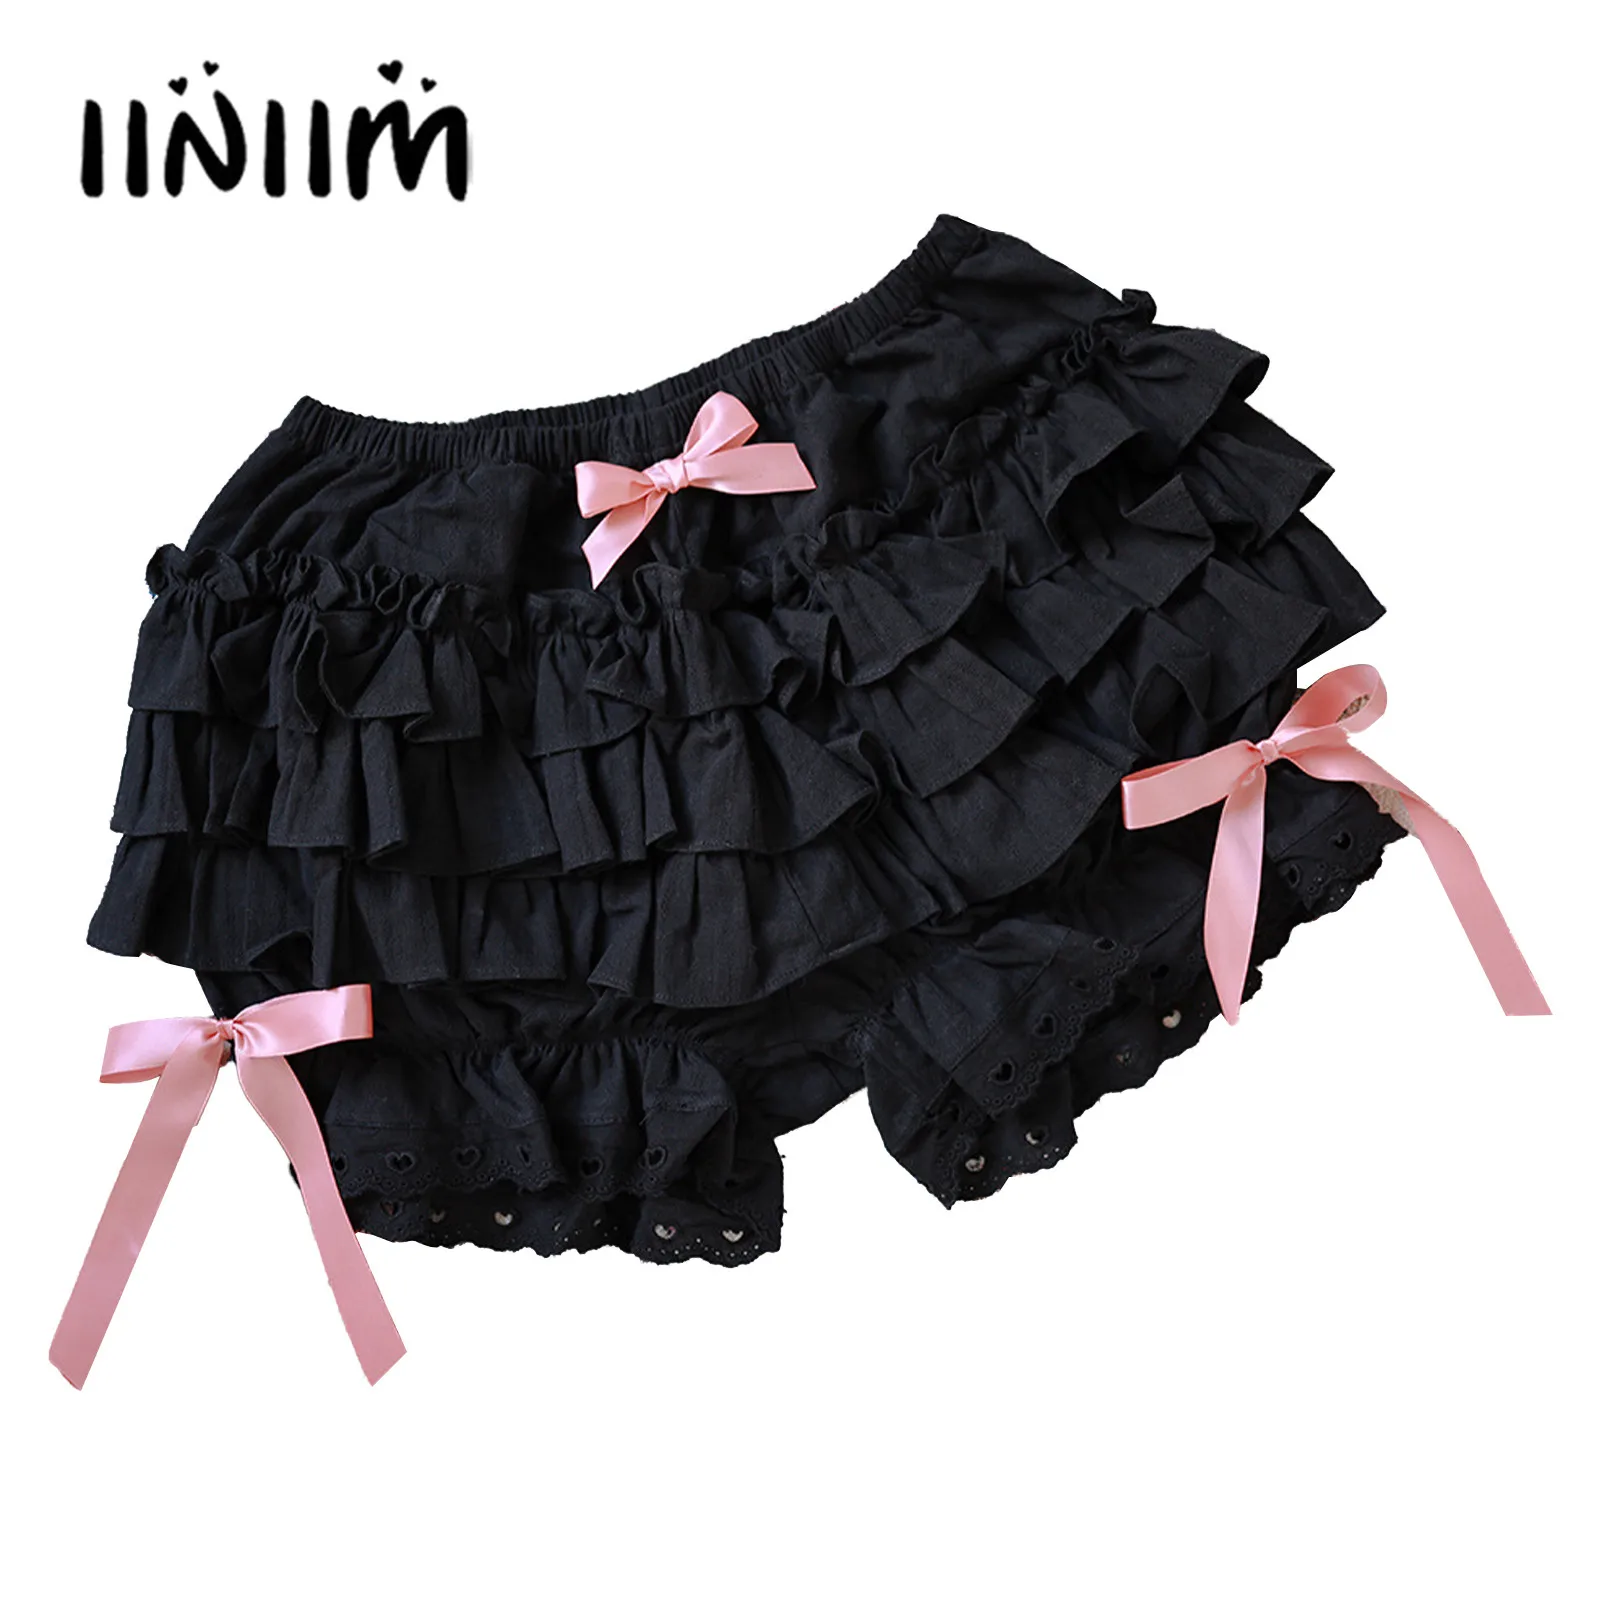 Don't miss the campaign Womens Vintage Victorian Pumpkin Shorts Trim Ruffle Selling Lace Layered